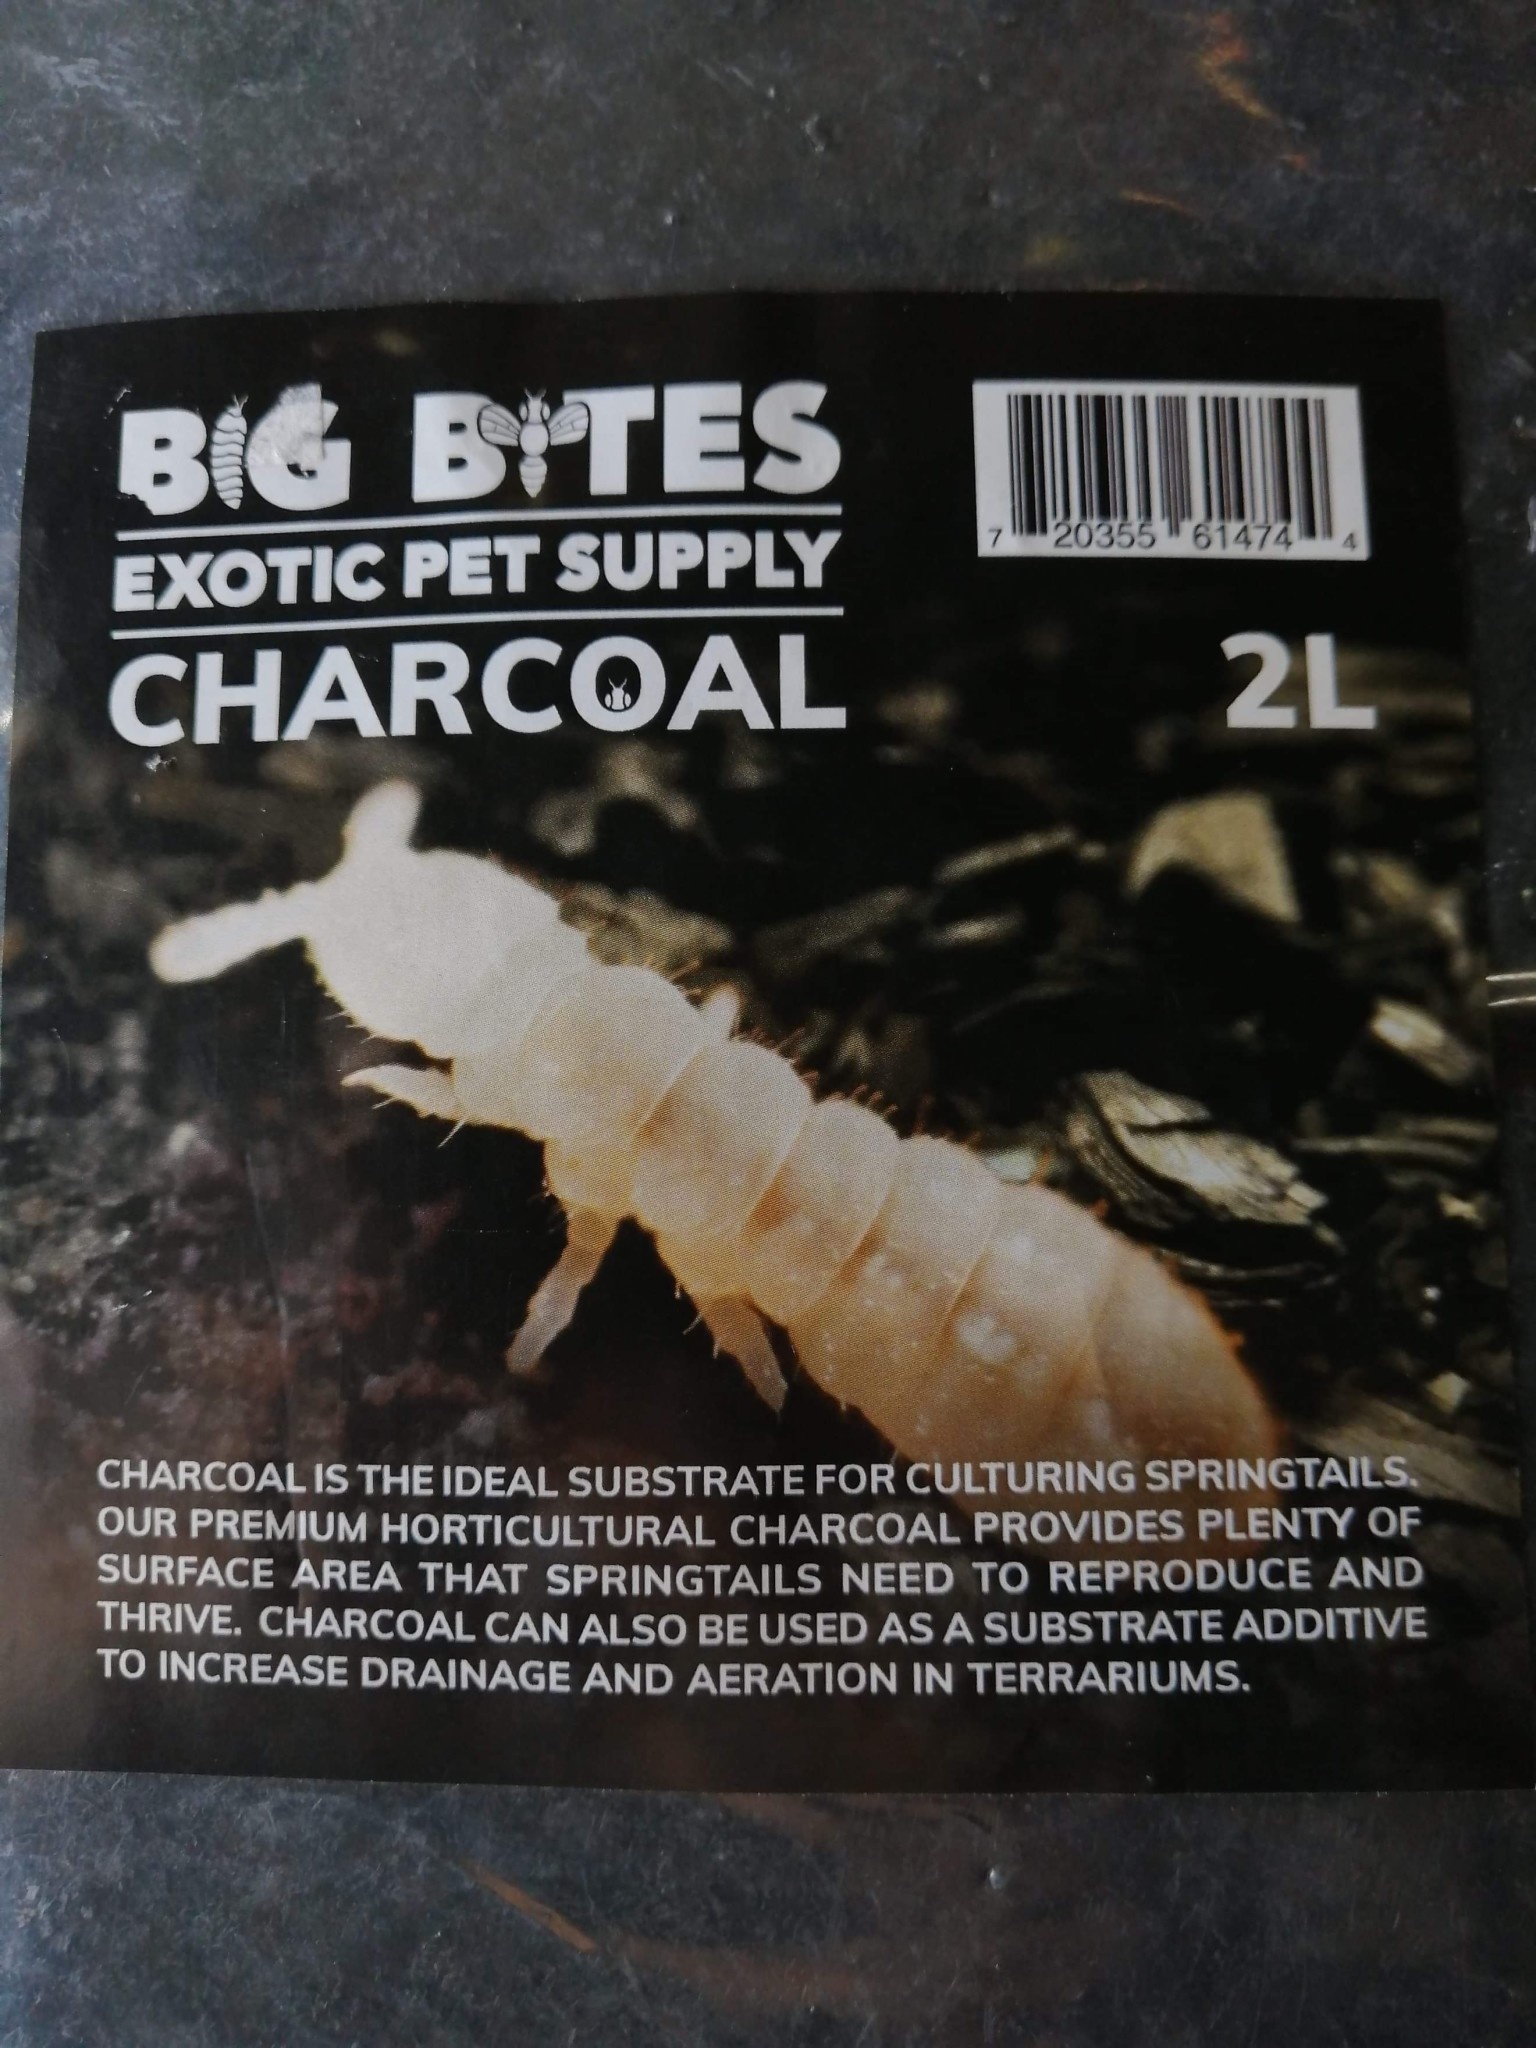 Big Bites Substrate for springtail culture 2 L Charcoal